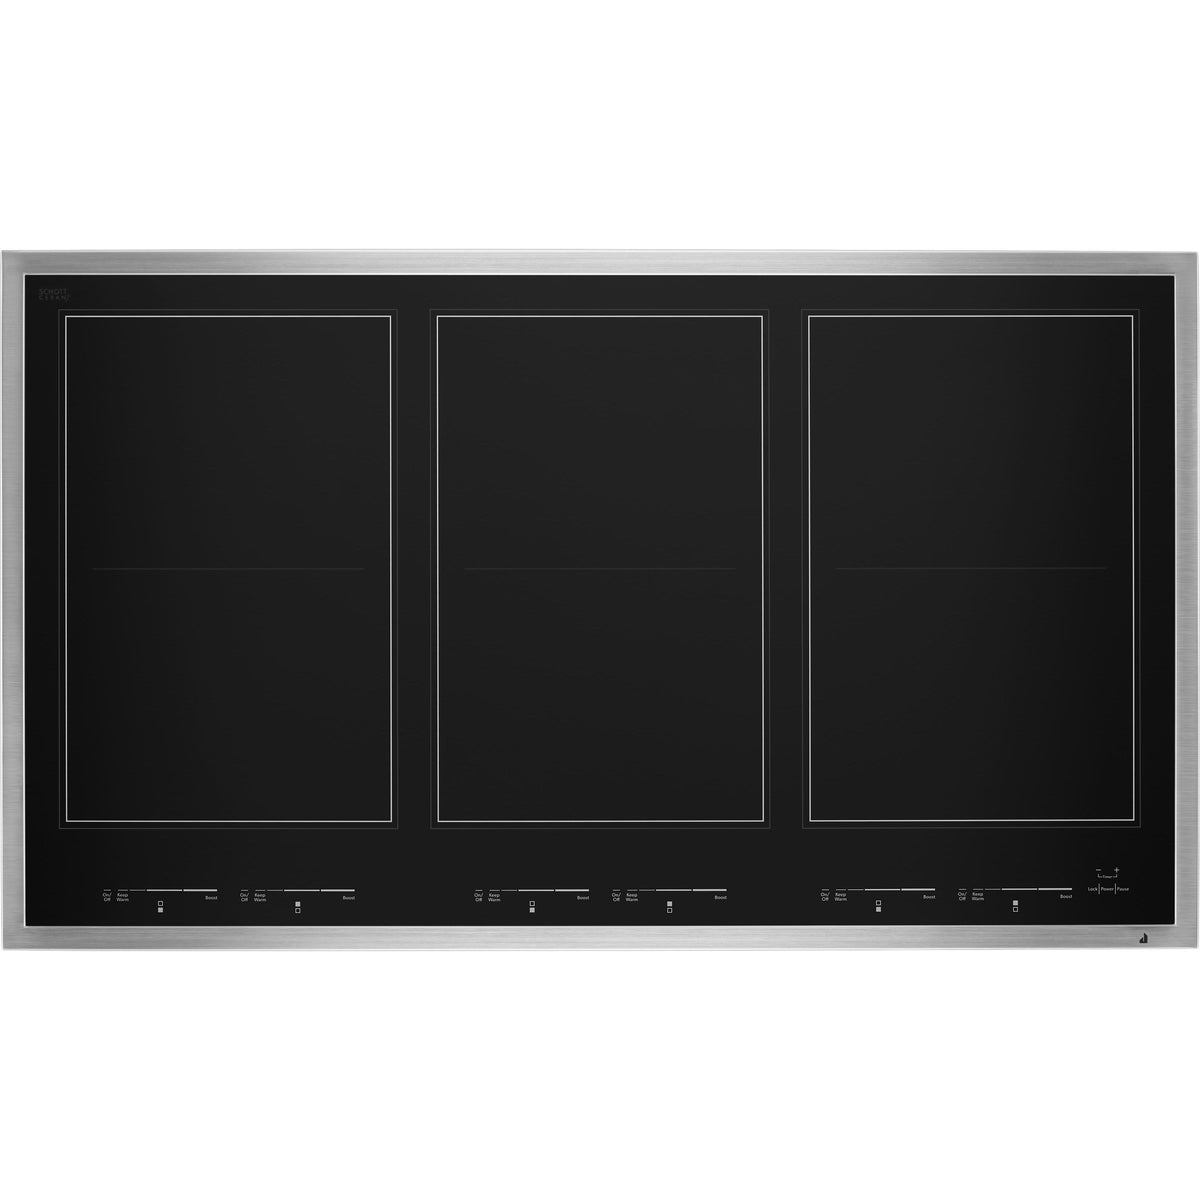 JennAir 36-inch Built-in Induction Cooktop JIC4736HS IMAGE 1